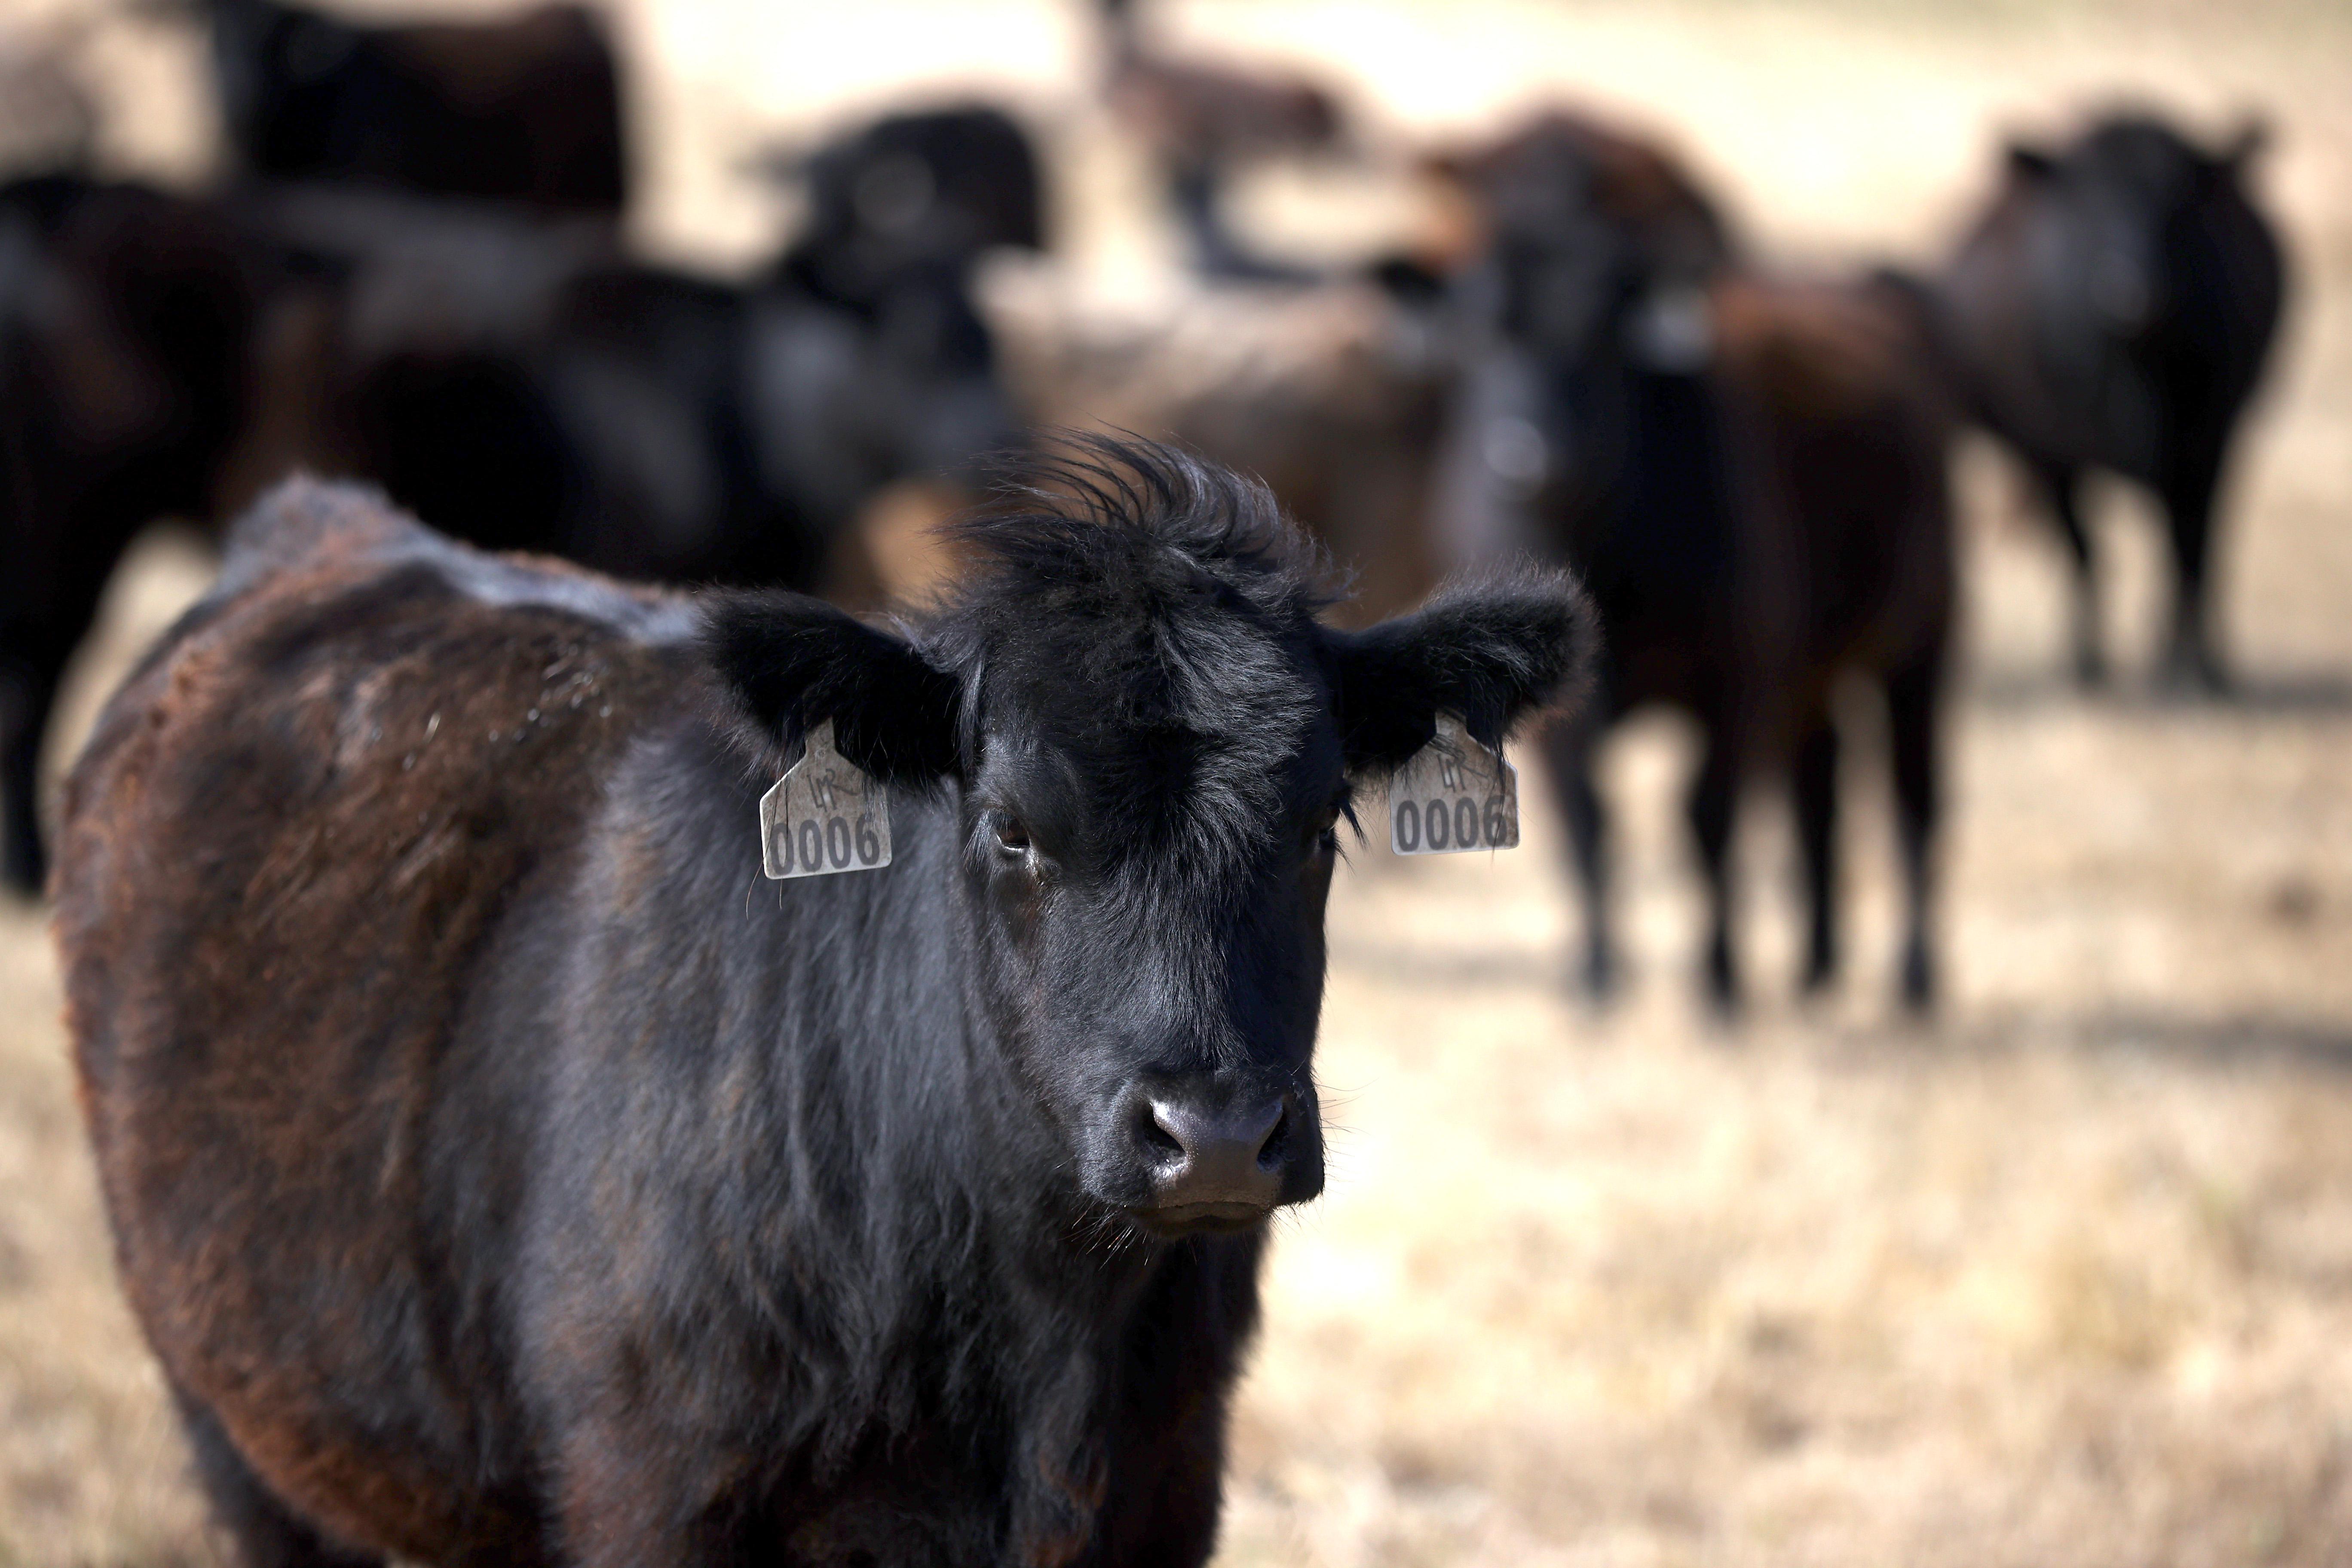 The megadrought is forcing ranchers to slaughter far more animals.